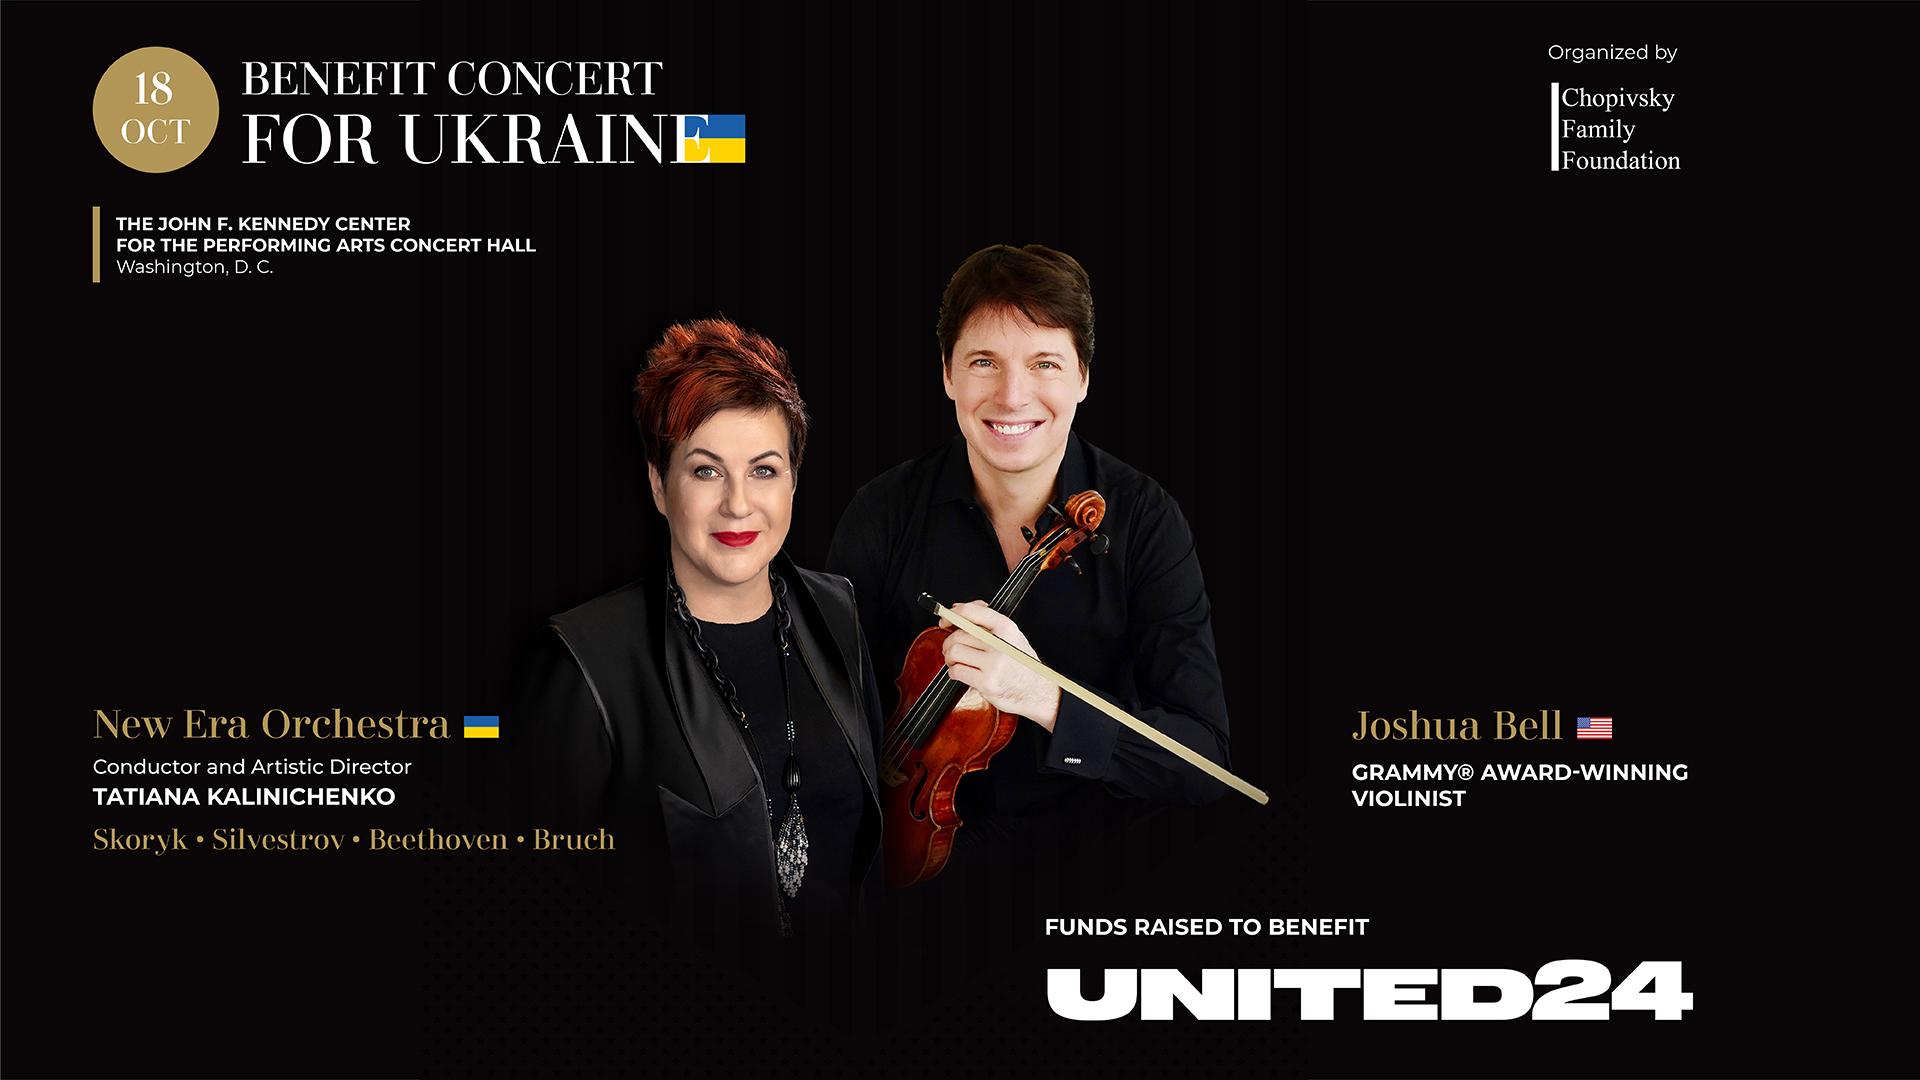 A Benefit Concert for Ukraine will take place in Washington, D.C.